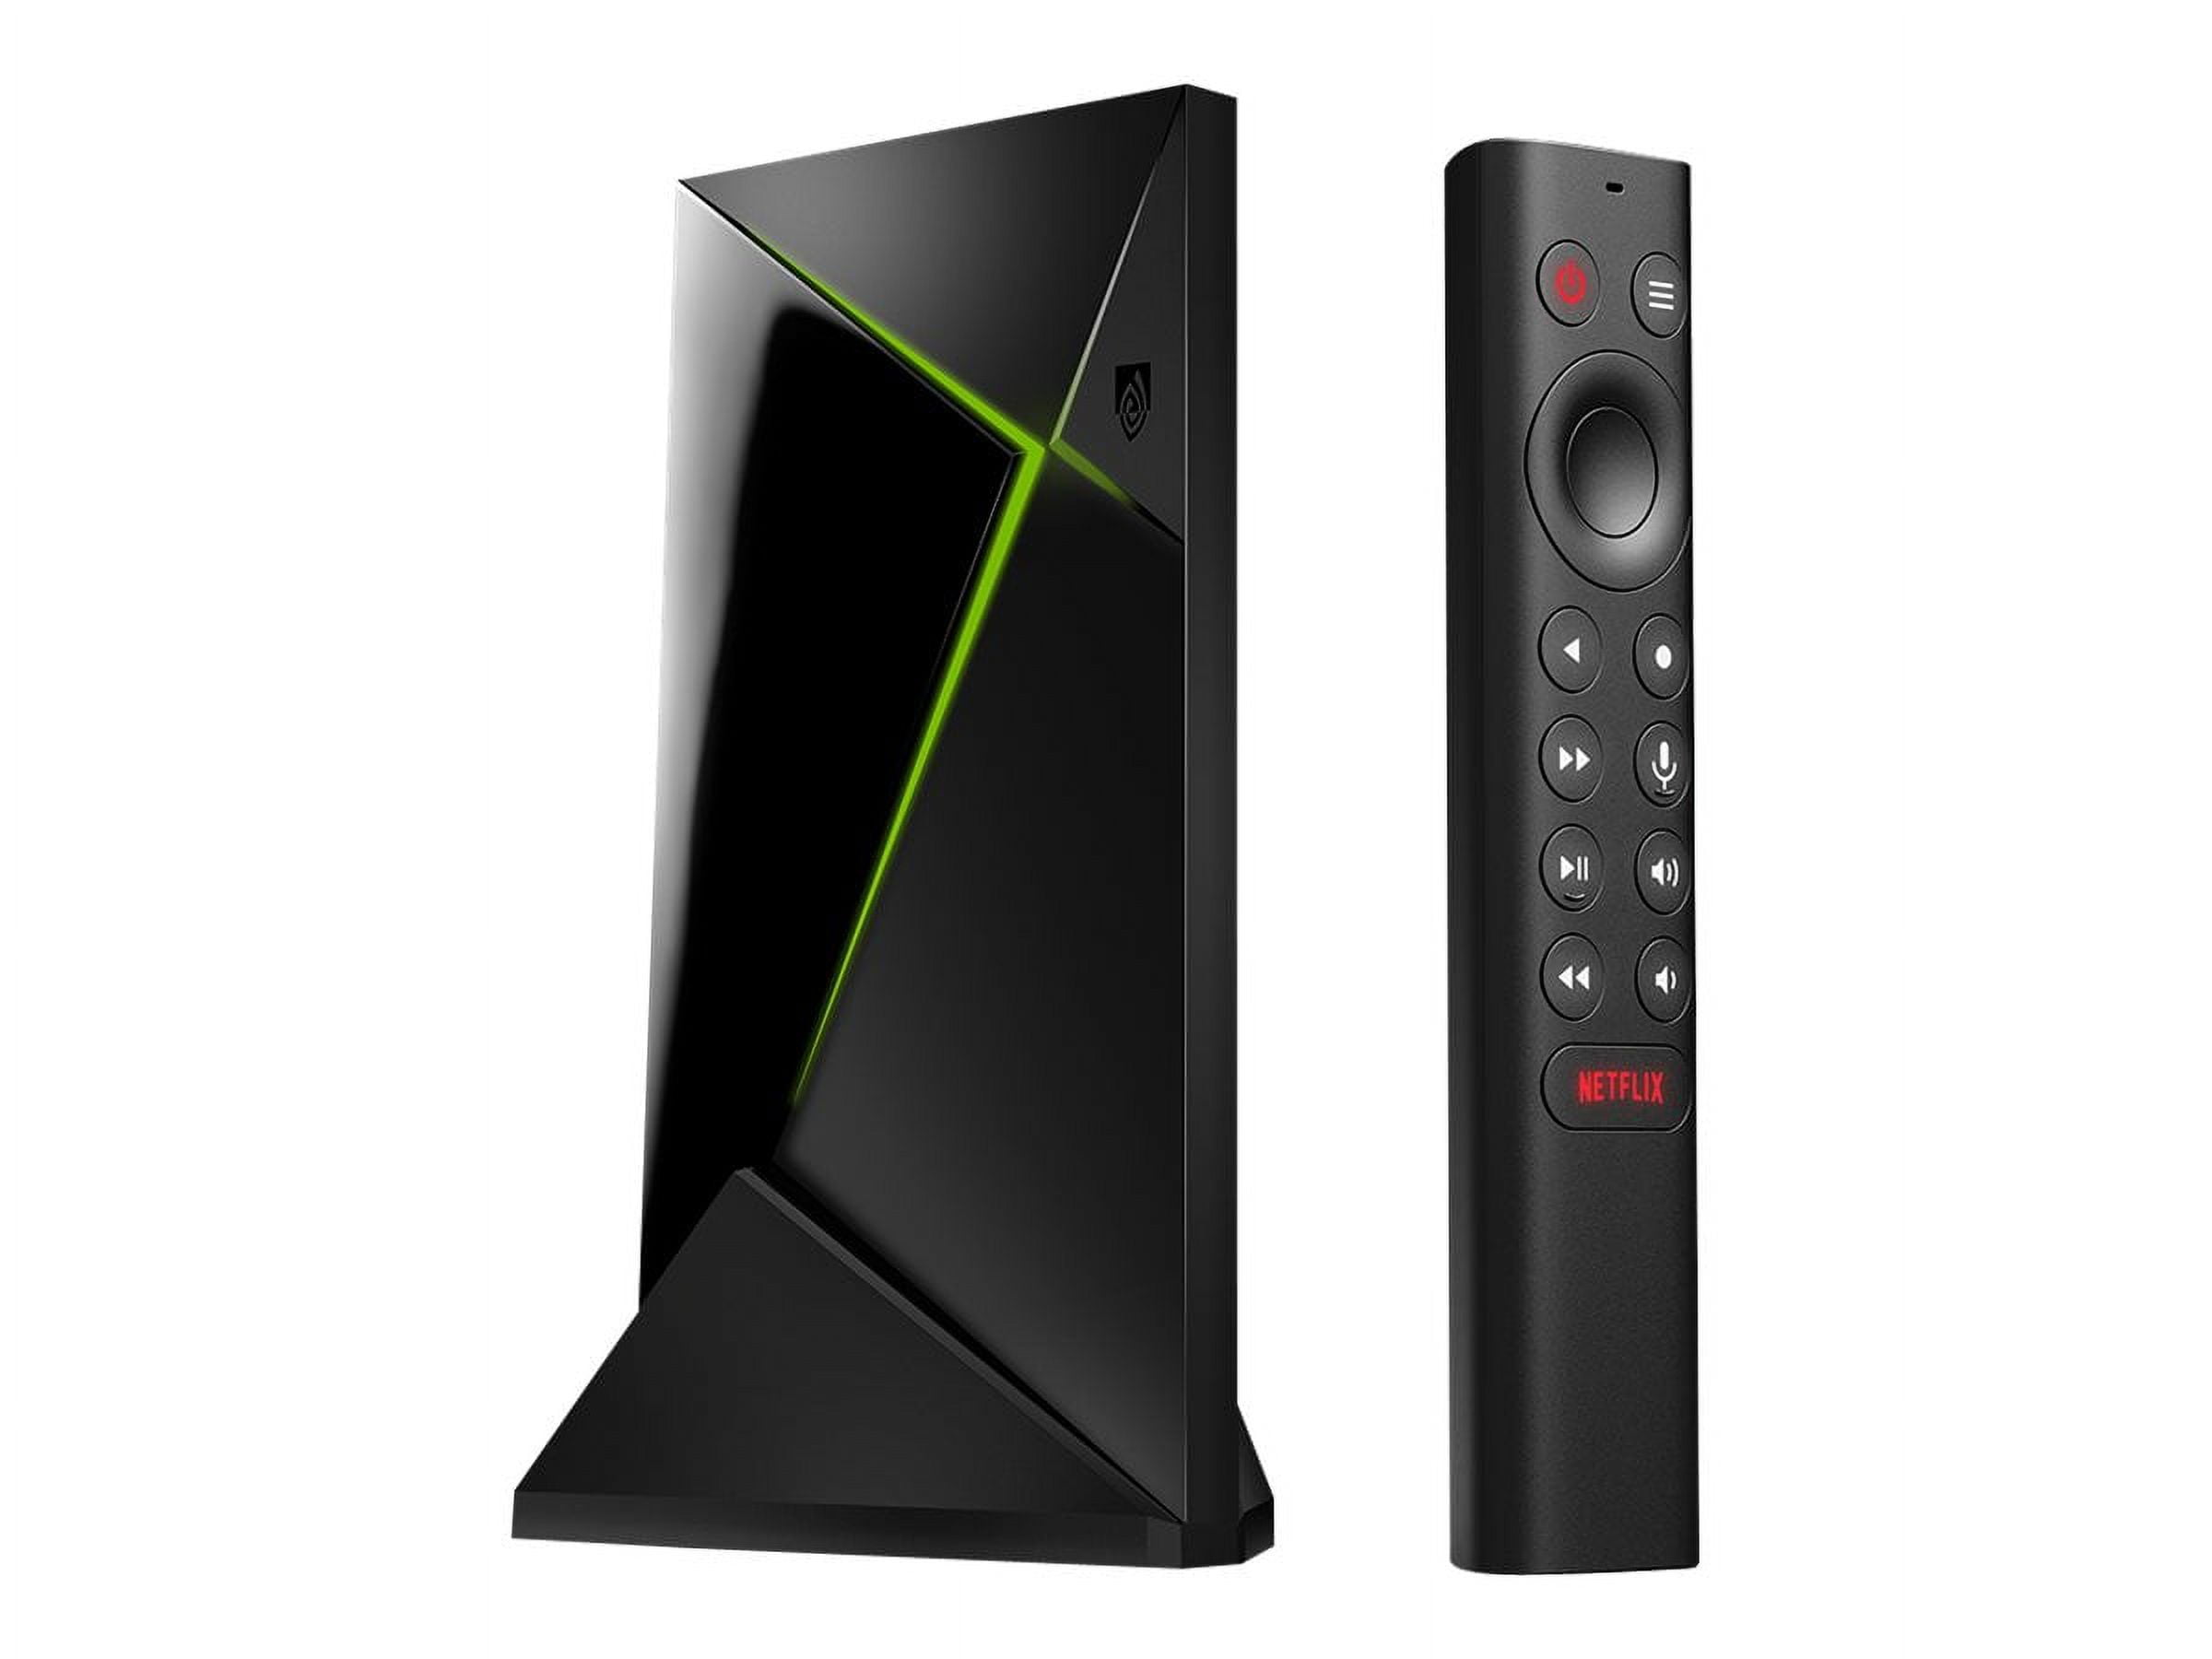 NVIDIA SHIELD Android TV Pro - 4K HDR Streaming Media Player - High  Performance, Dolby Vision, 3GB RAM, 2 x USB, Google Assistant Built-In,  Works with Alexa (945-12897-2500-101) 